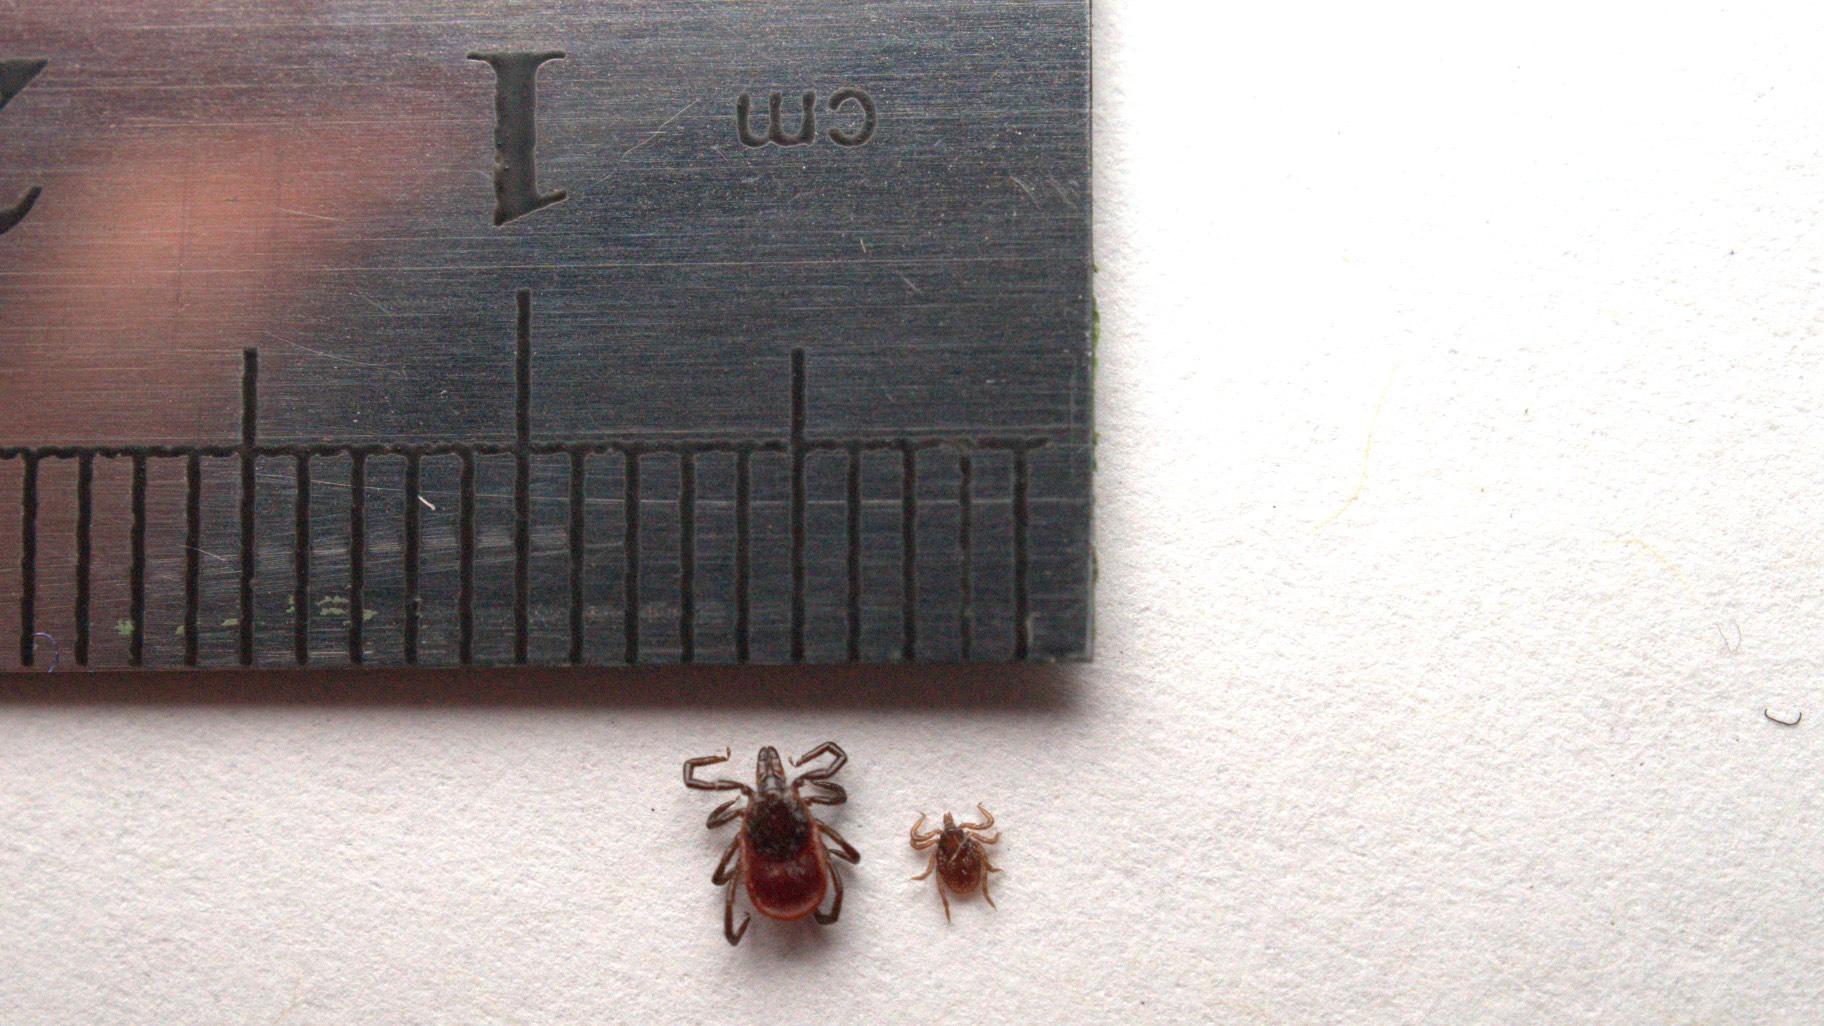 The immature nymph stage of ticks poses the greatest risk in part because it's so tiny as to be almost undetectable. (Courtesy of Lincoln Park Zoo)